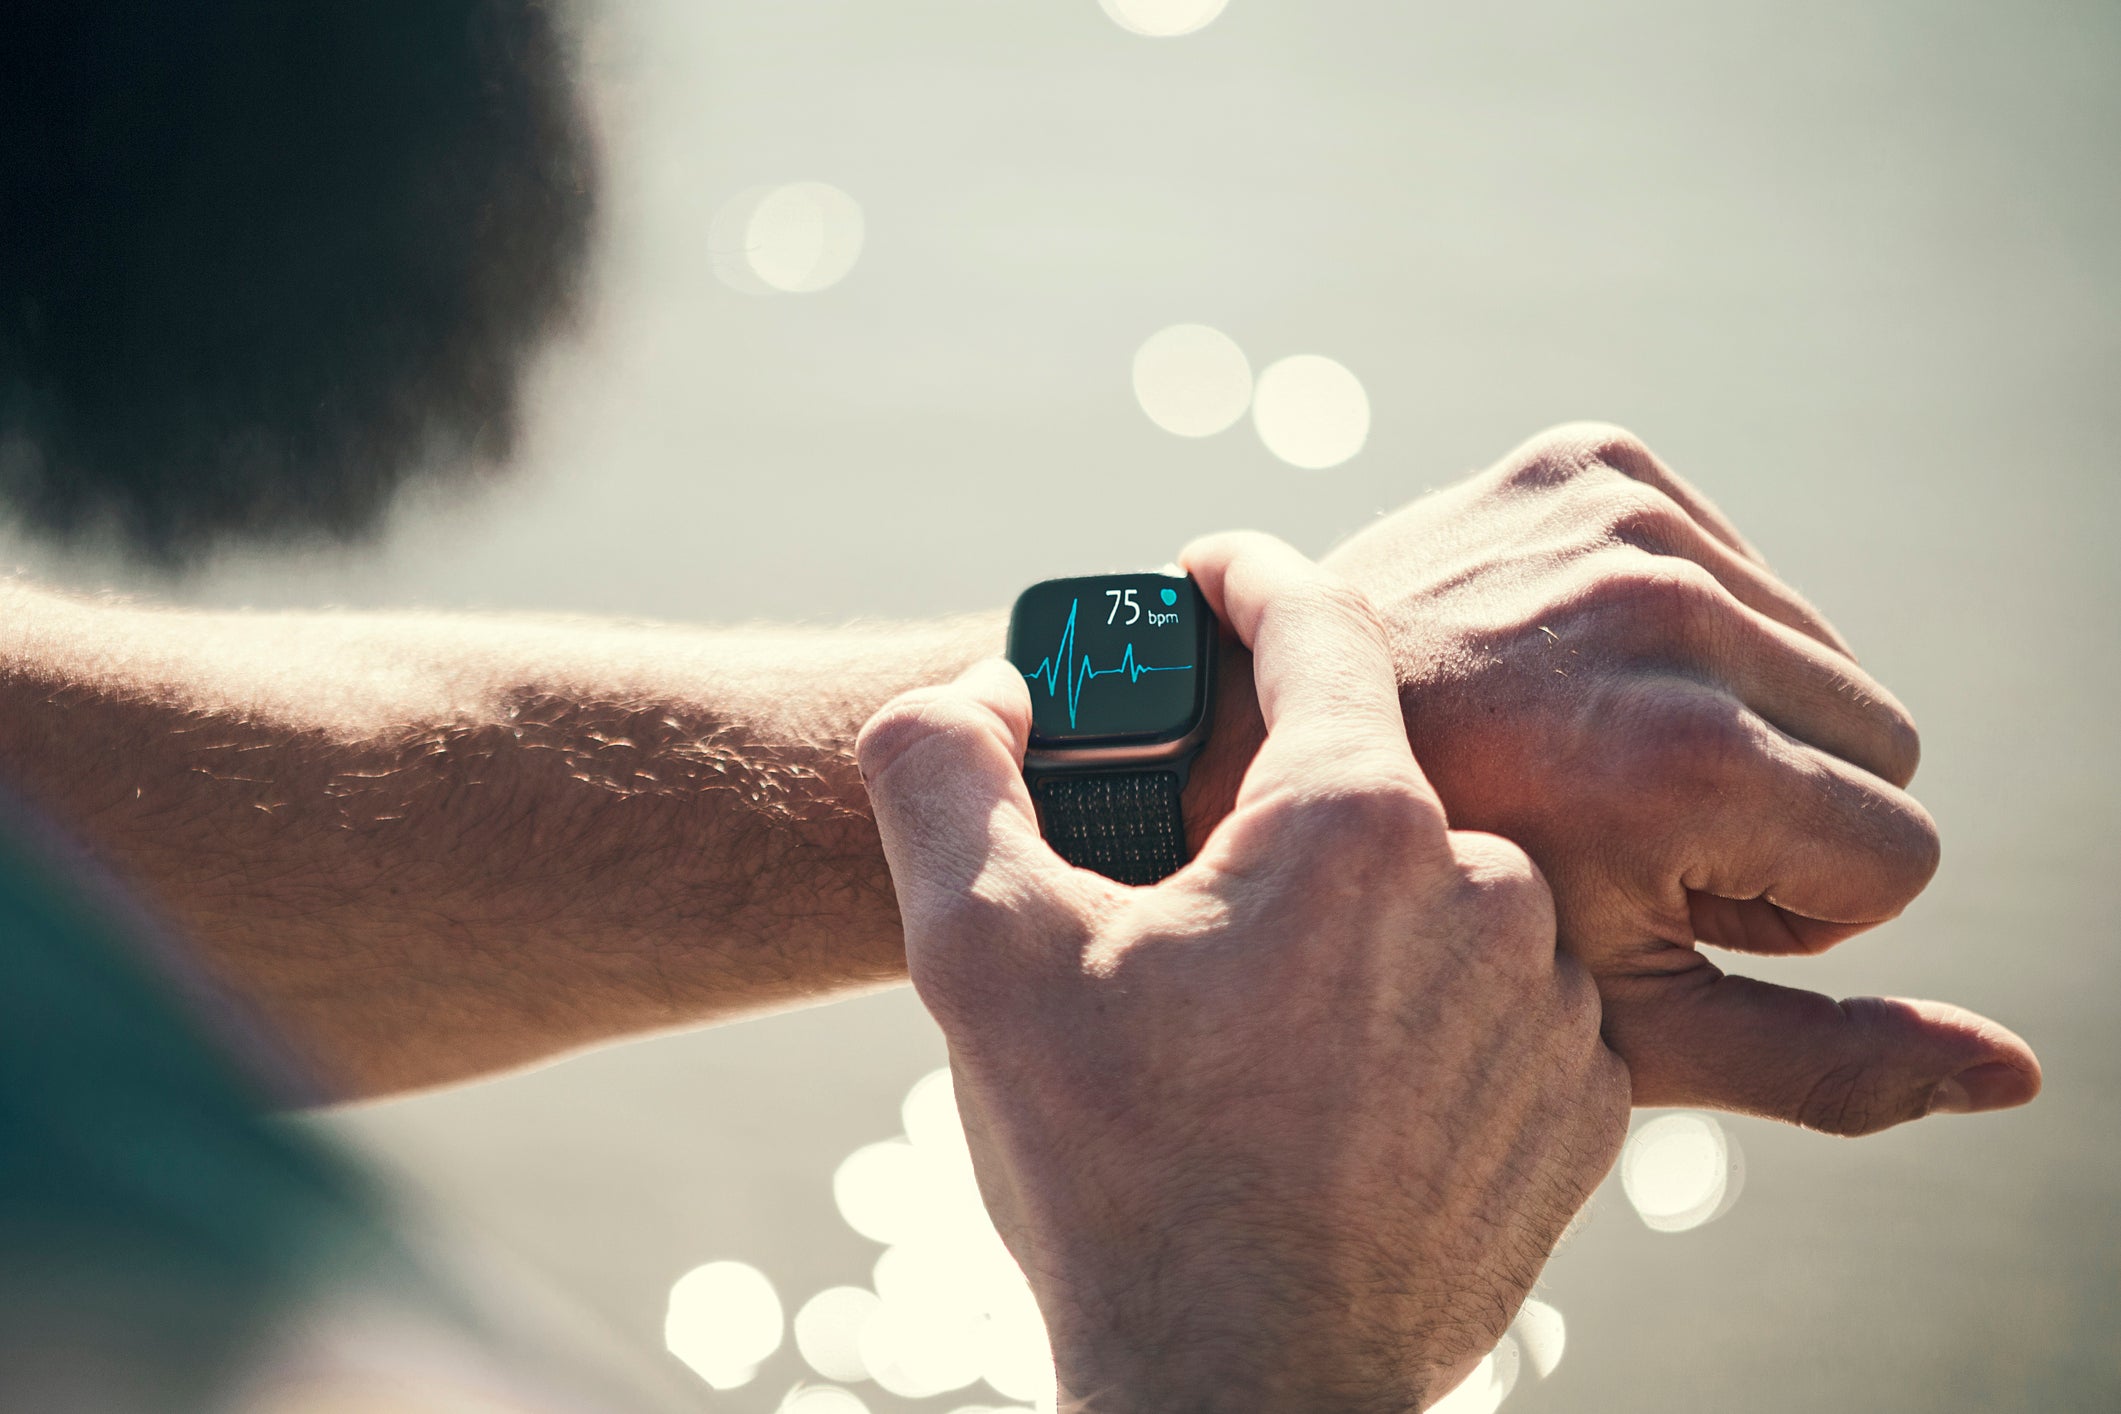 Leading cardiologists want to see more evidence regarding the link between smartwatches and detecting possible heart conditions